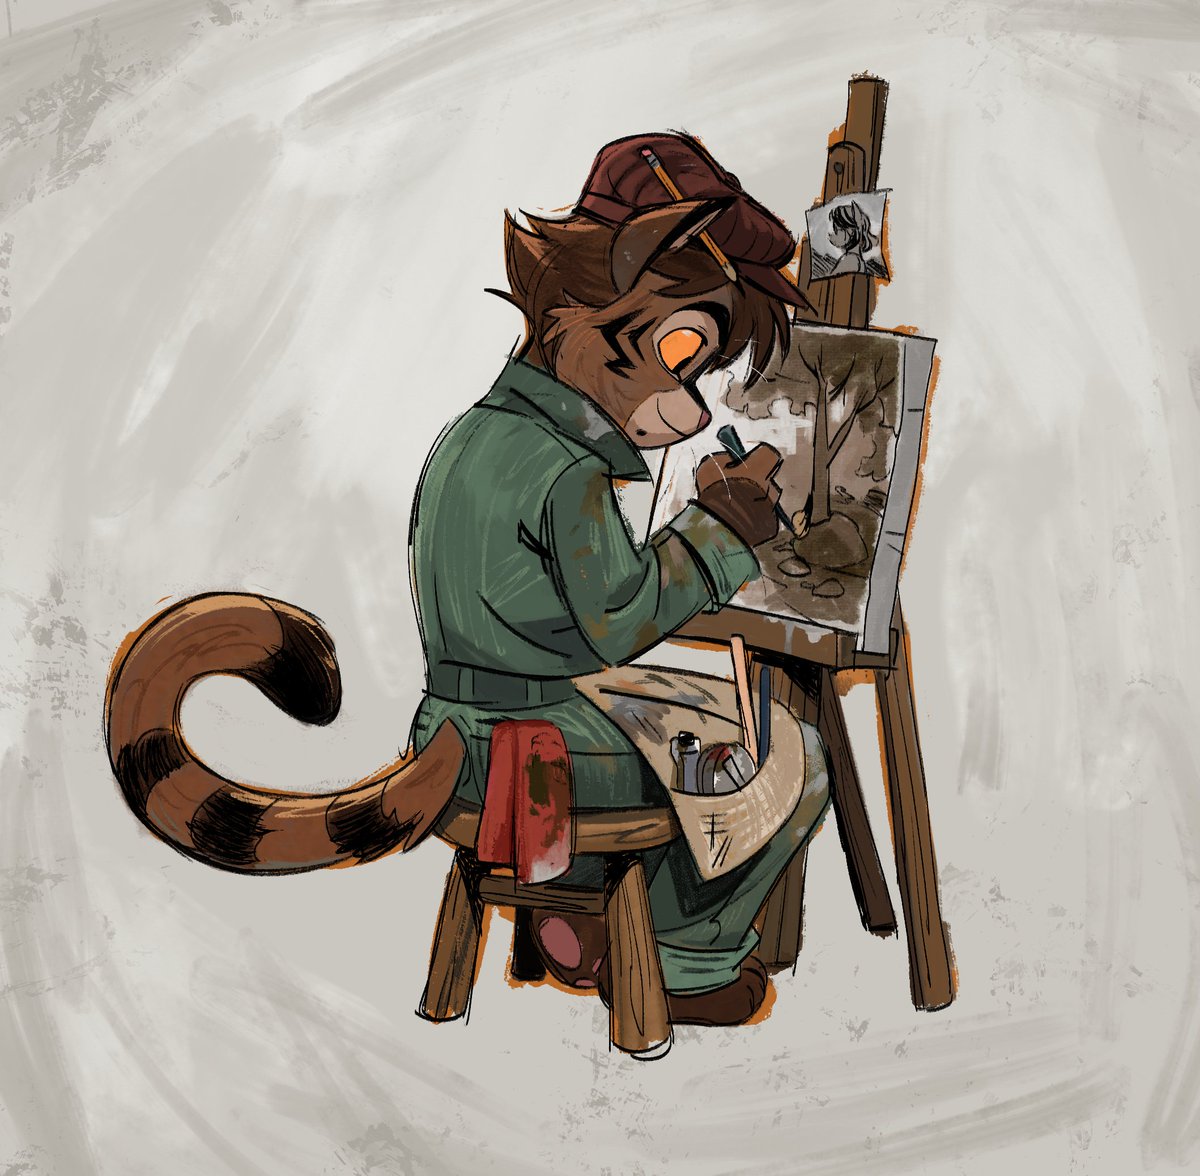 I decided in lackadaisy universe my sona would definitely be some kind of starving-artist landscape painter